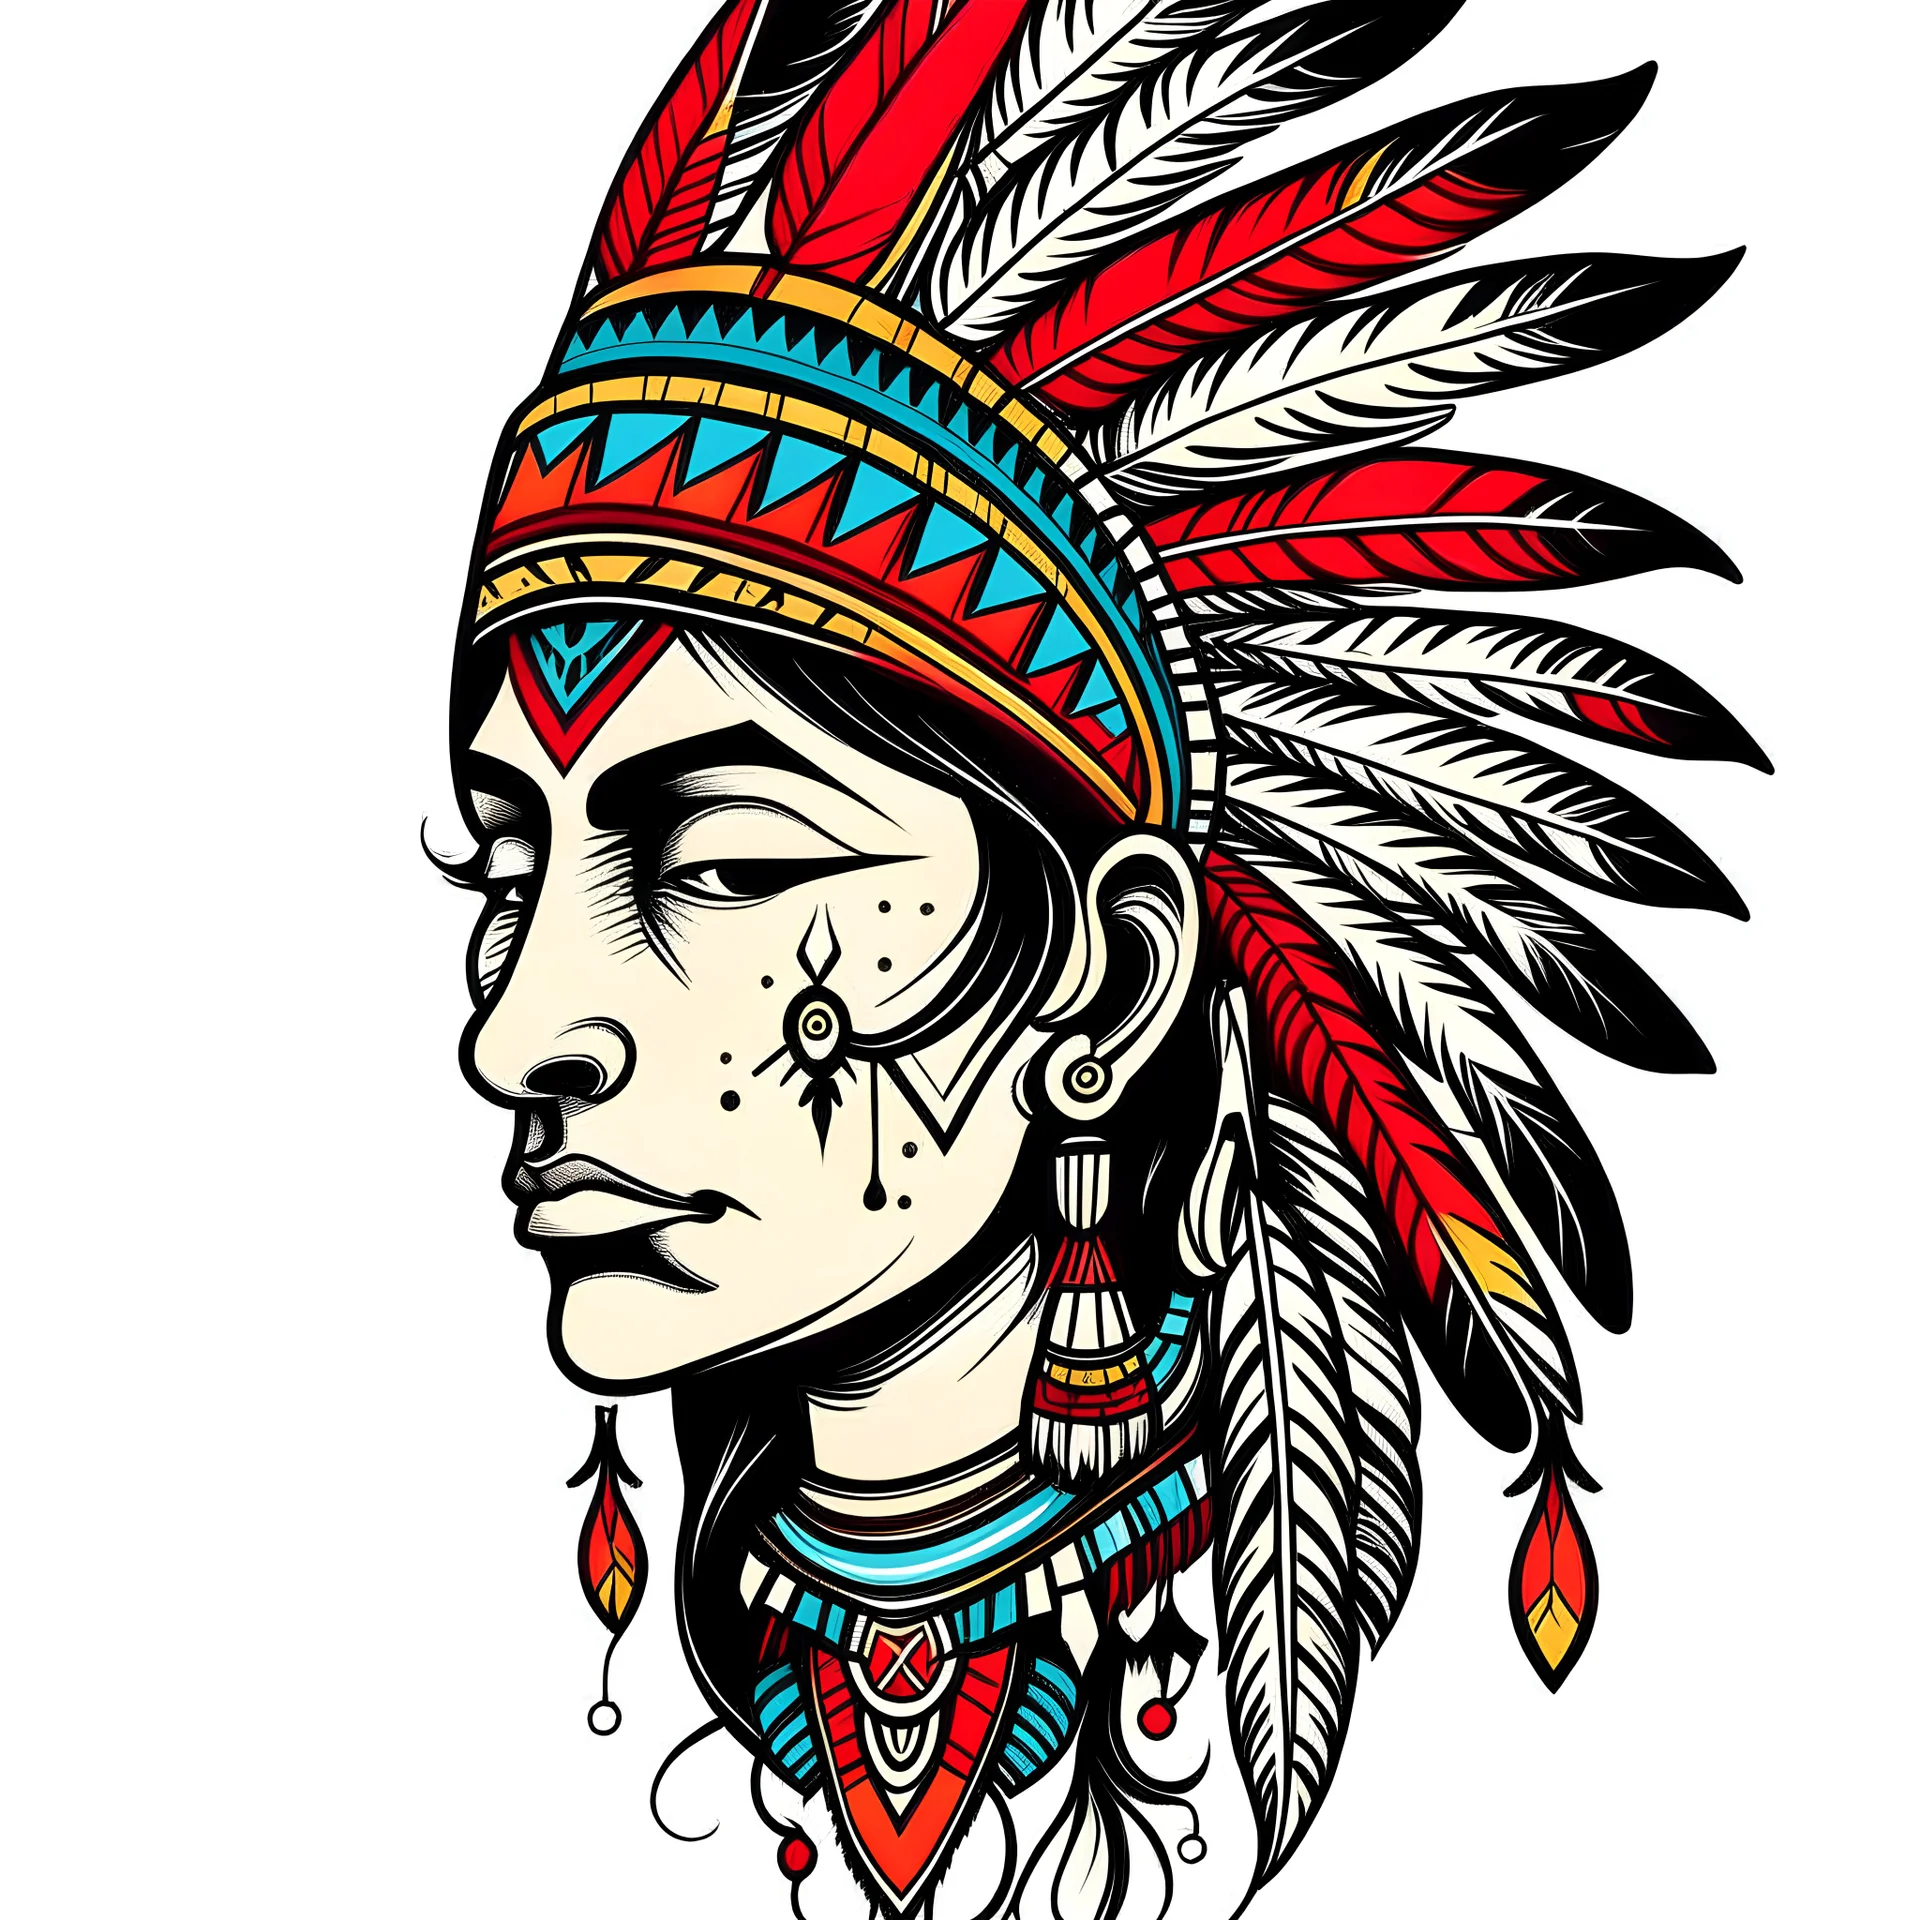 a modern tattoo design, old school style, thick black lines, on a plain white background, featuring a native american as the main element, minimal style, vibrant saturated color palette, Hand drawn aesthetic, old school style with hints of American traditional tattoo style